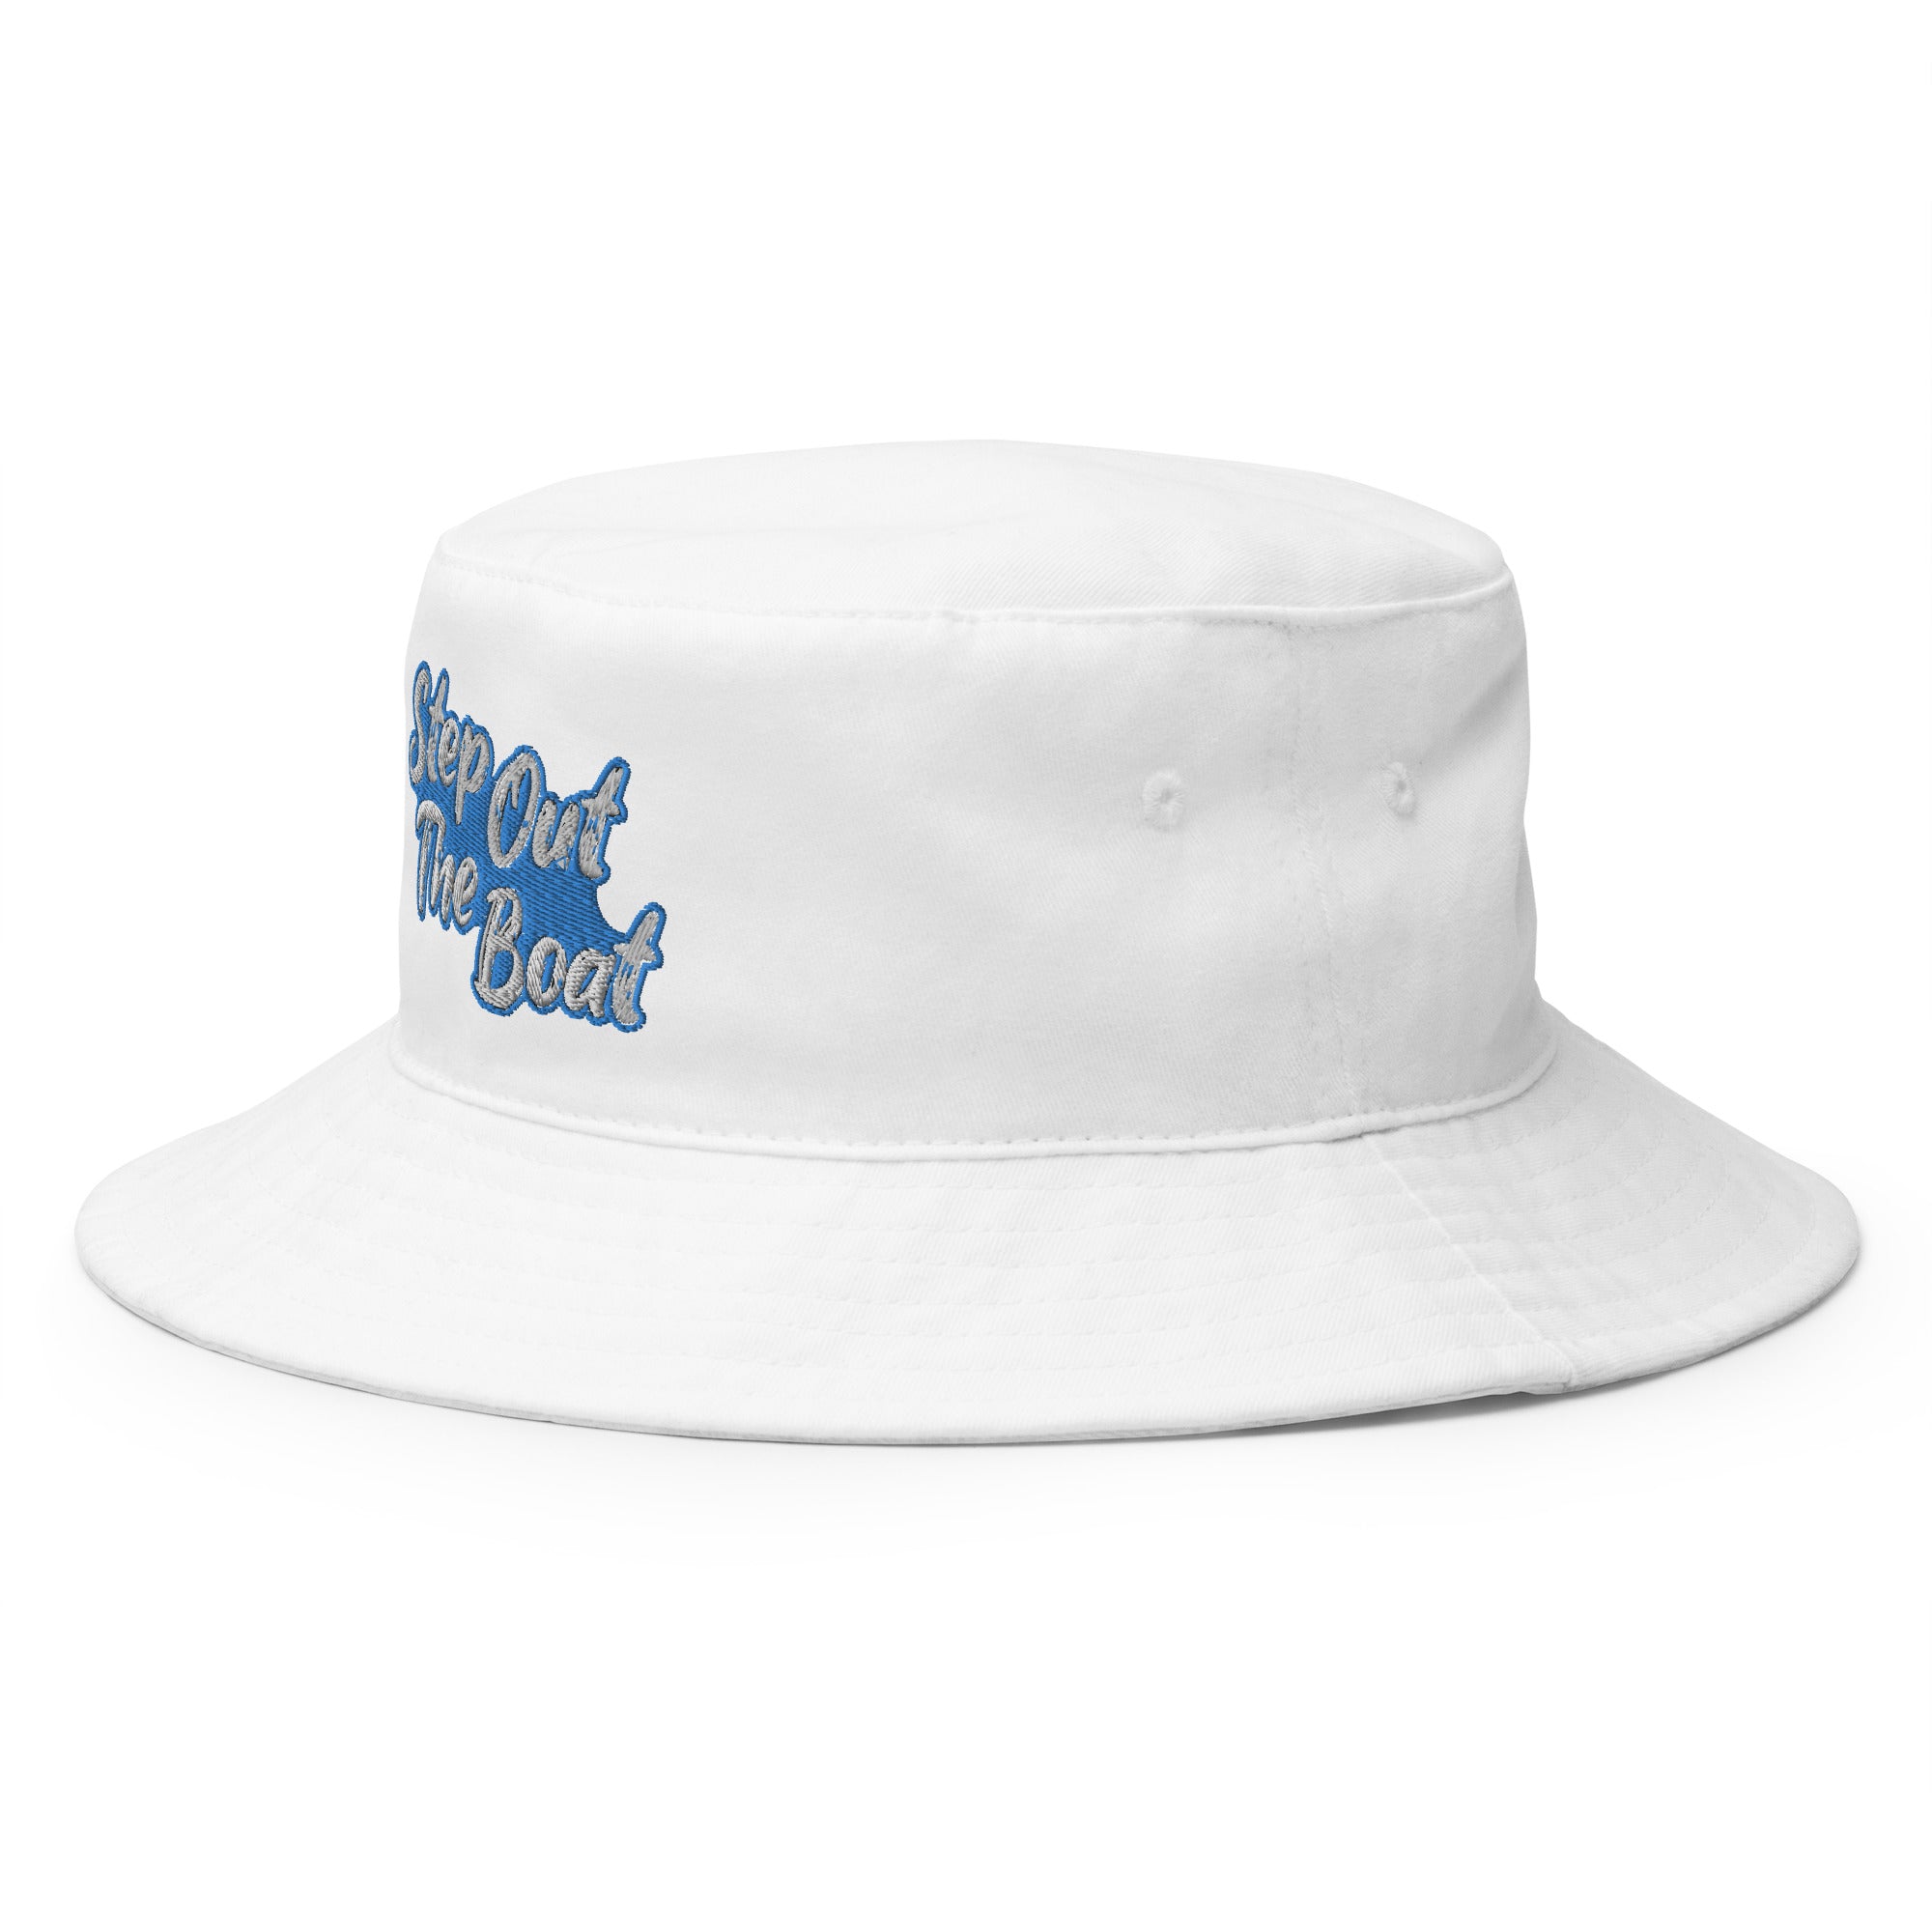 Step Out The Boat Bucket Hat